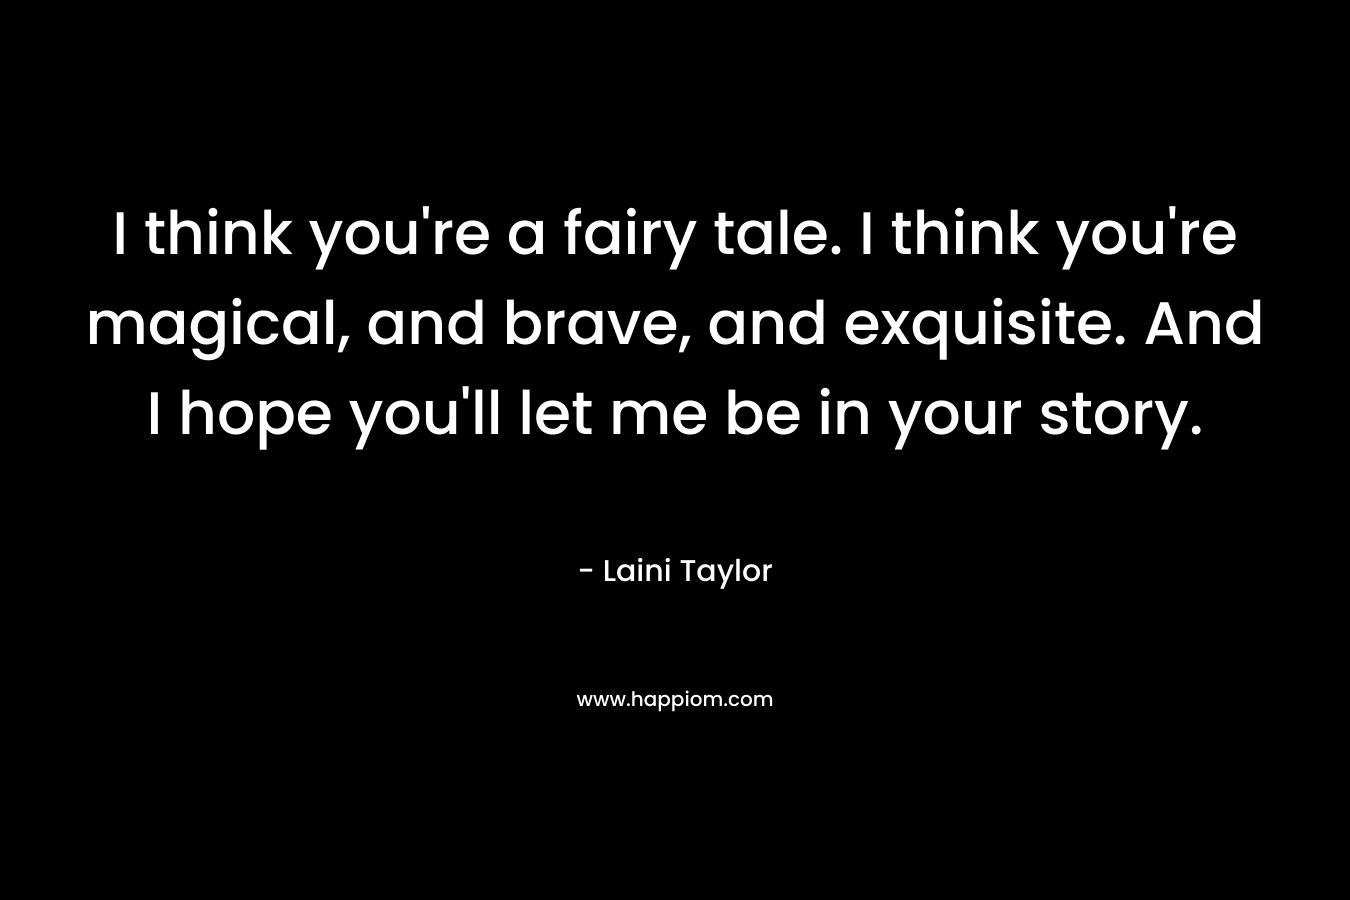 I think you're a fairy tale. I think you're magical, and brave, and exquisite. And I hope you'll let me be in your story.